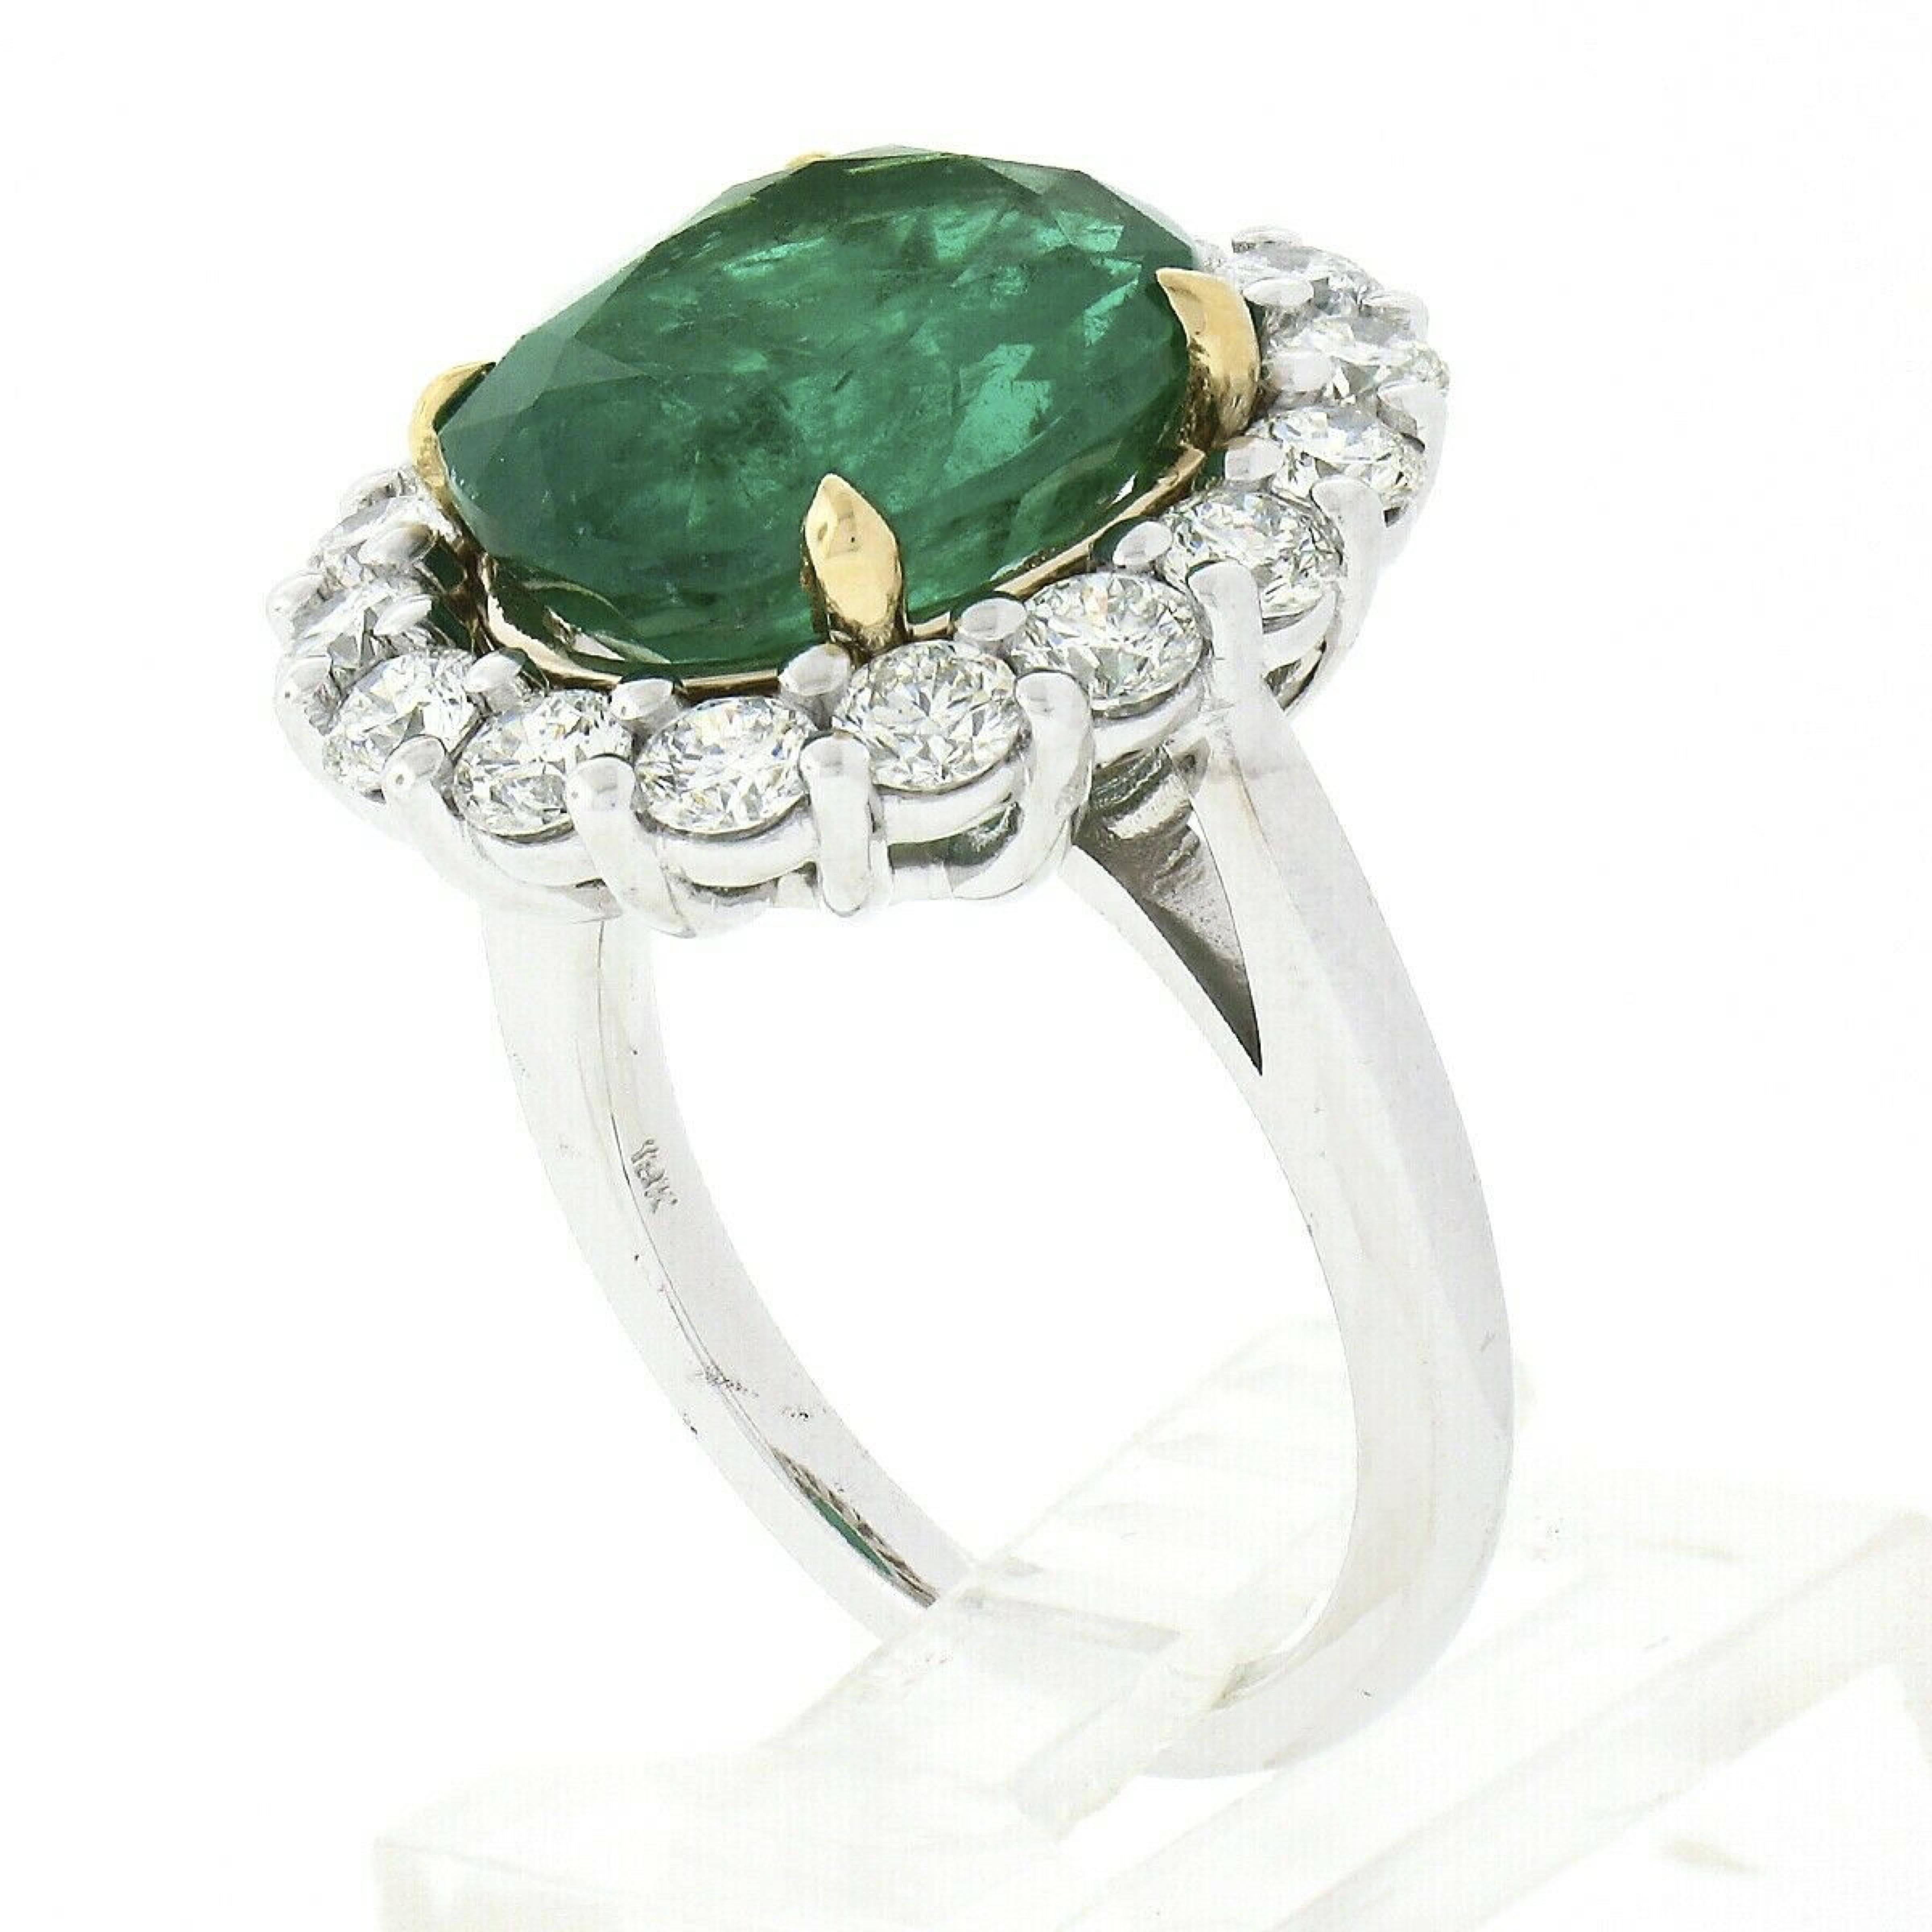 New 18k TT Gold 7.94ct GIA Oval Emerald w/ Diamond Halo Engagement Cocktail Ring 5